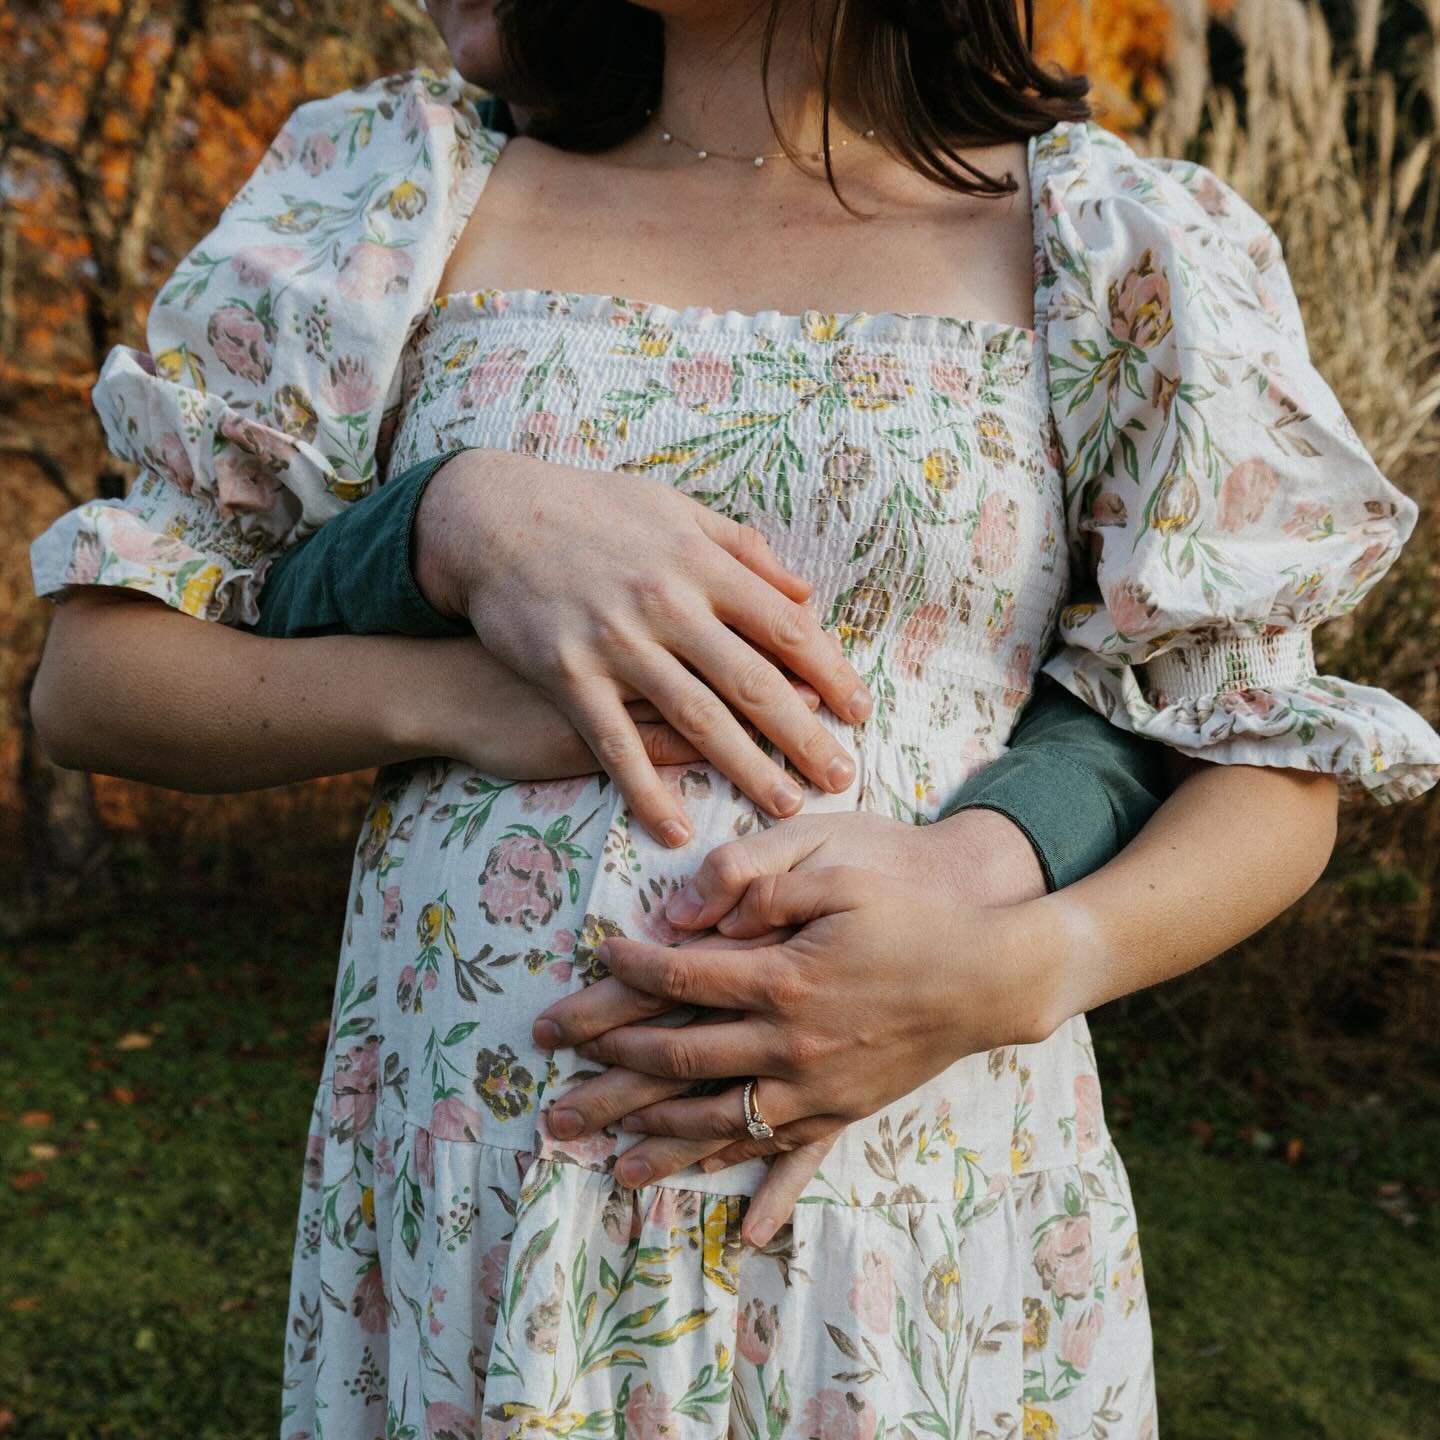 Ain&rsquo;t it just like love to find us 💗

I came across this maternity session I did in the fall and needed to reshare&hellip;I love this session and couple so much! We had the best time despite the cold weather, and the Arboretum was such a perfe